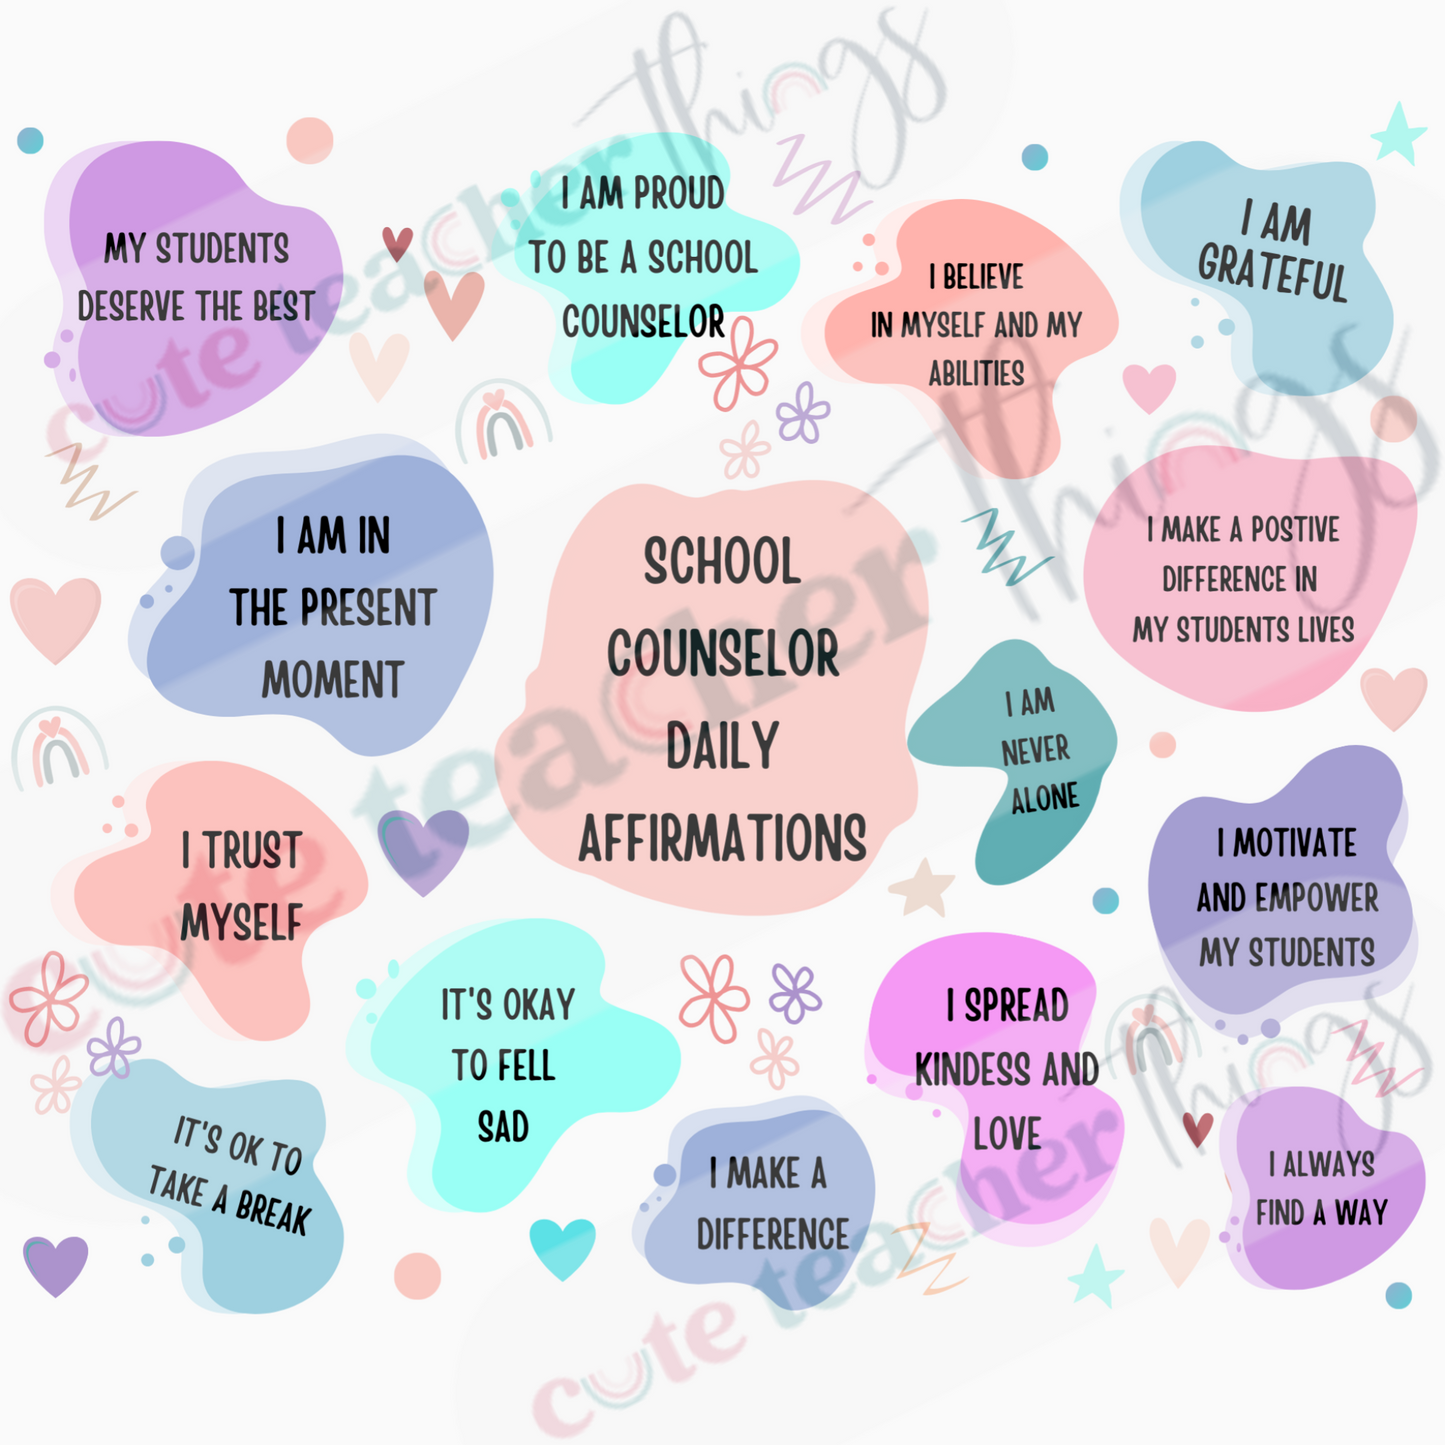 school counselor daily affirmations design